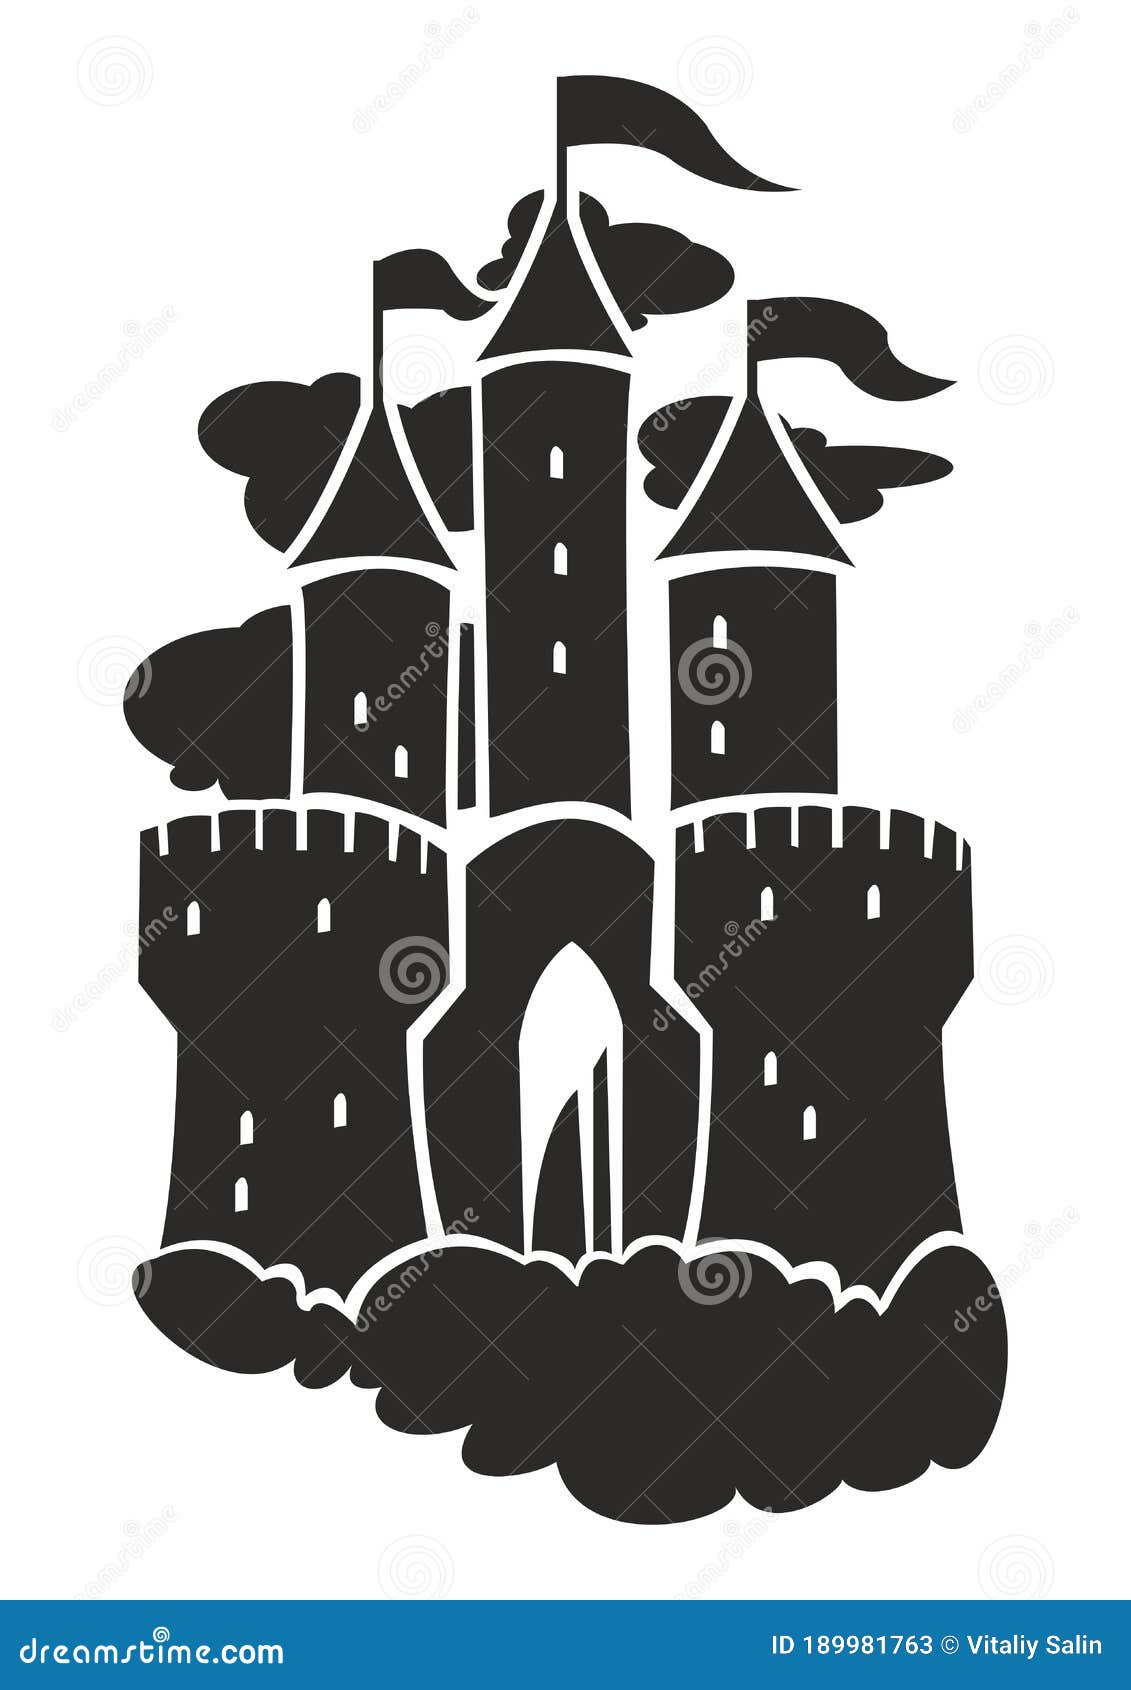 Premium Vector  Set of medieval castles fortresses and towers